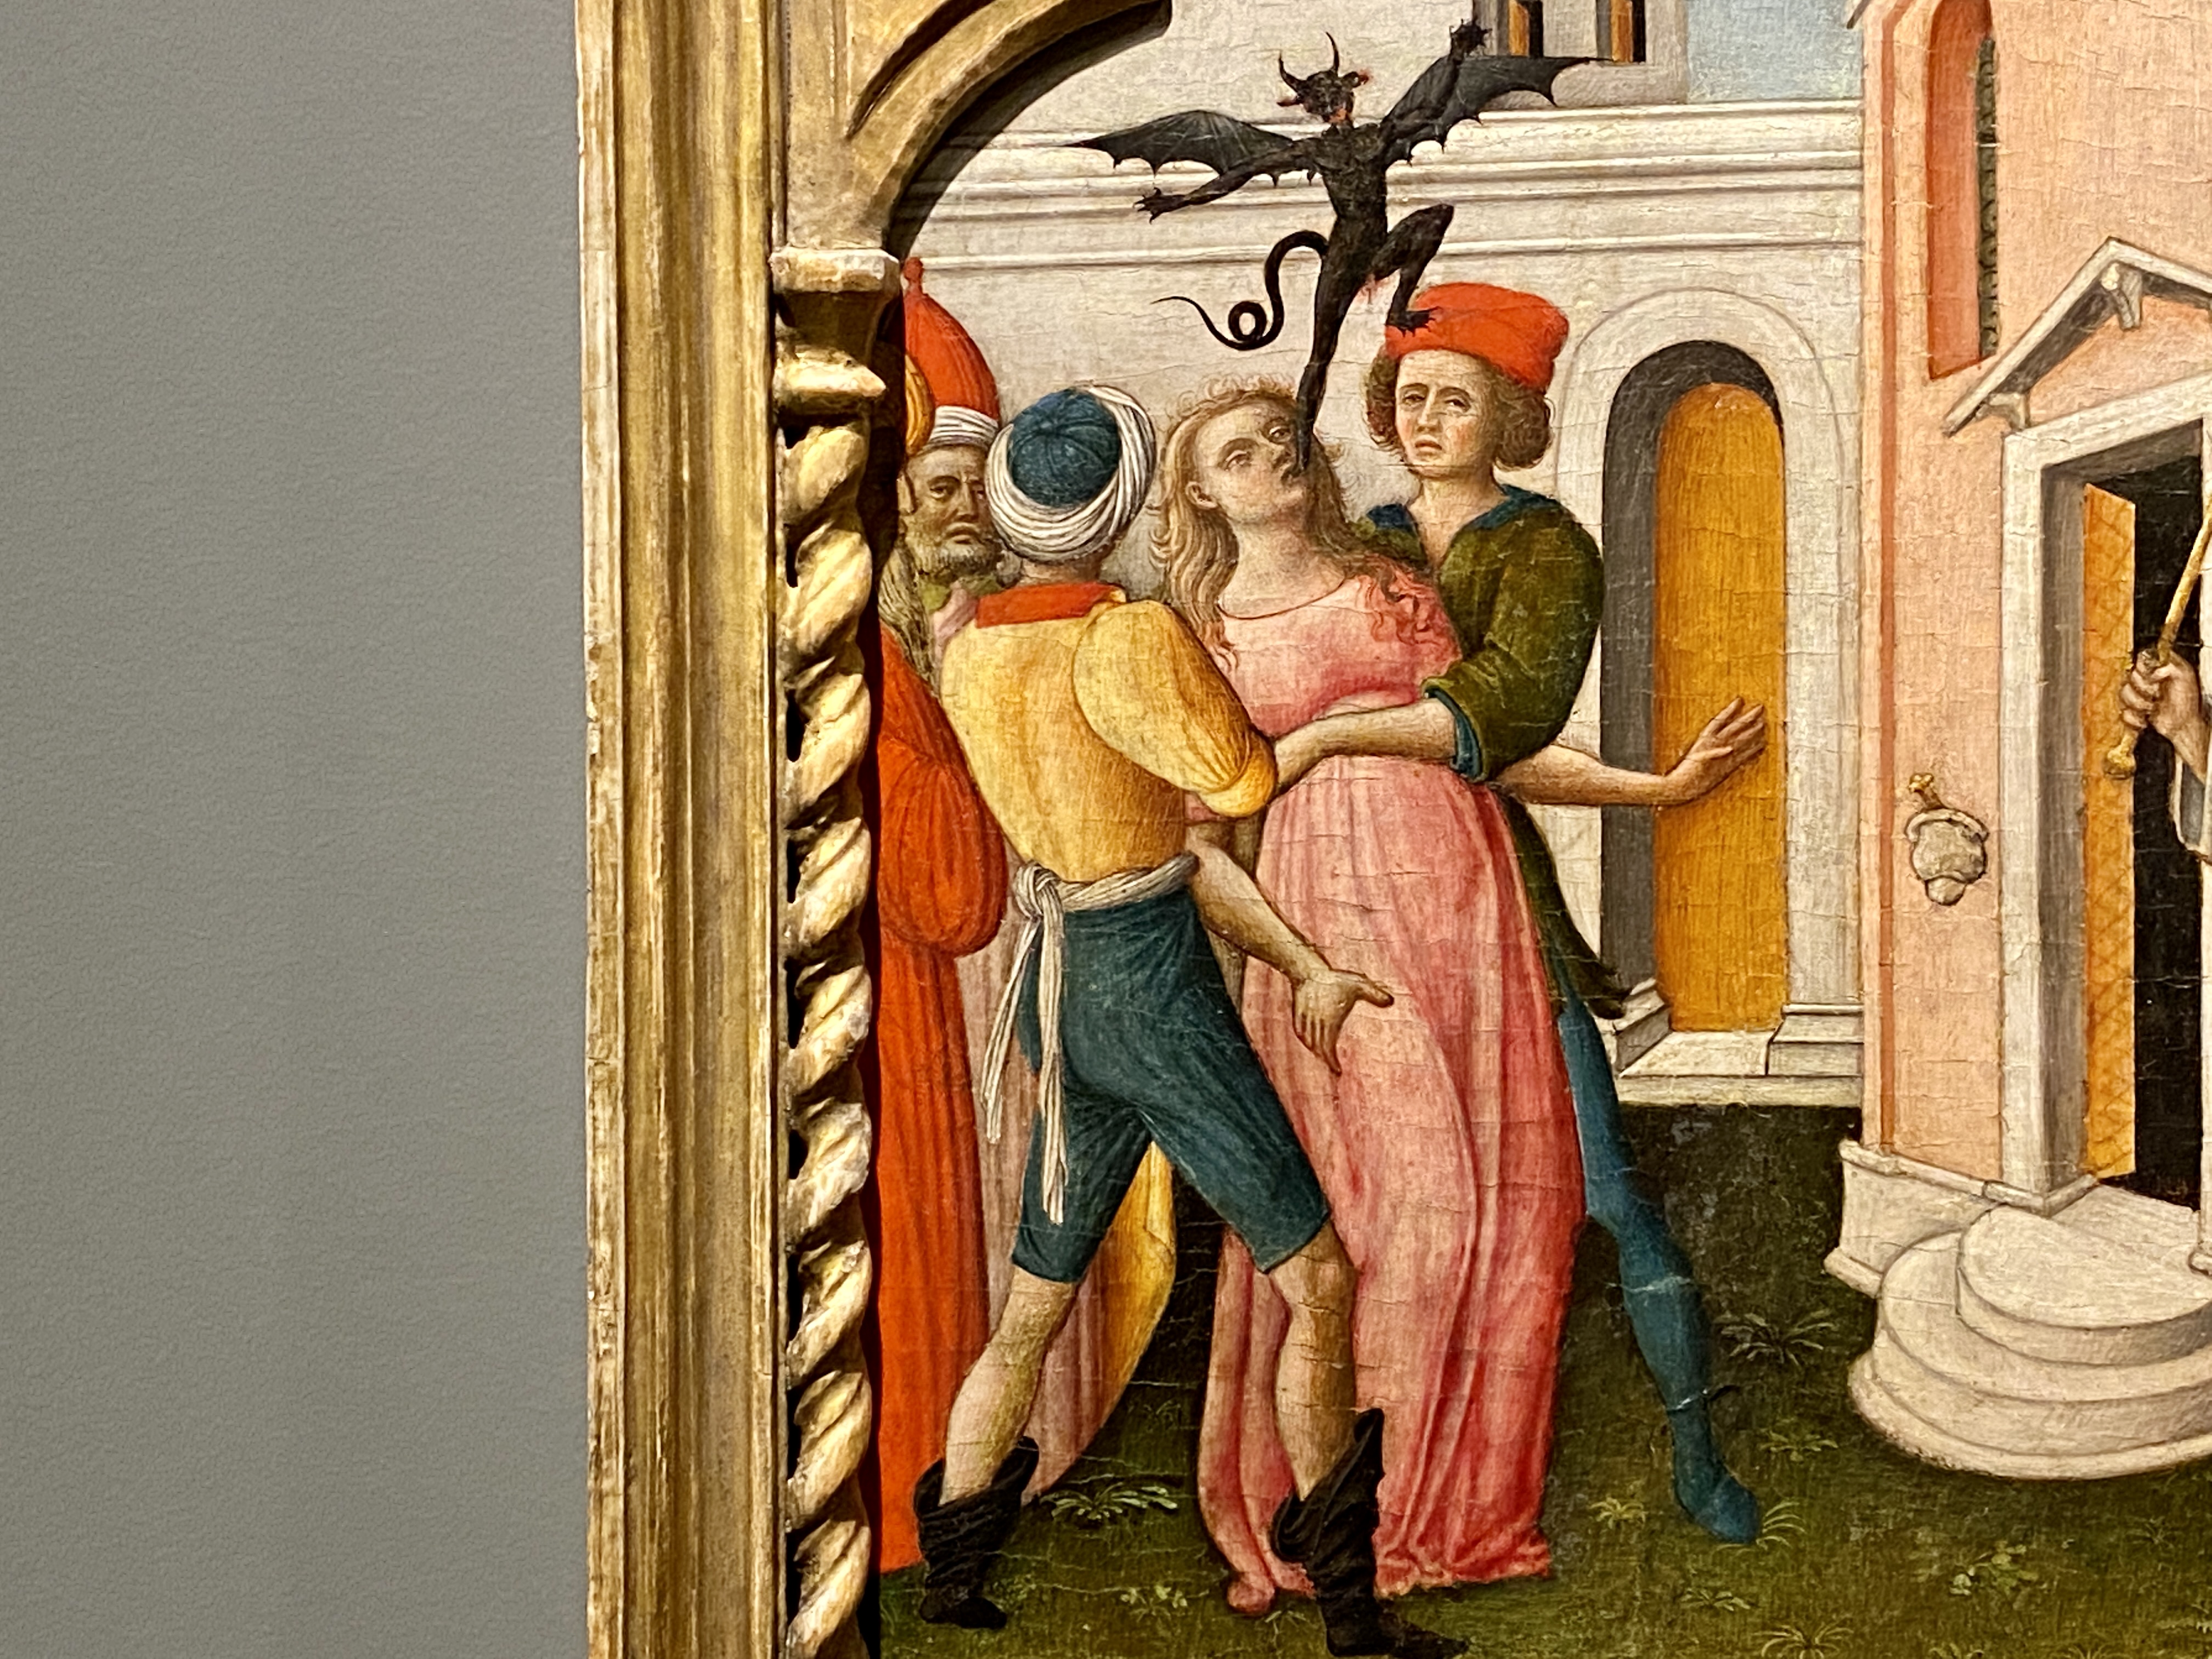 Detail of a brightly-colored medieval painting of peasants holding a young woman while a black demon floats from her mouth